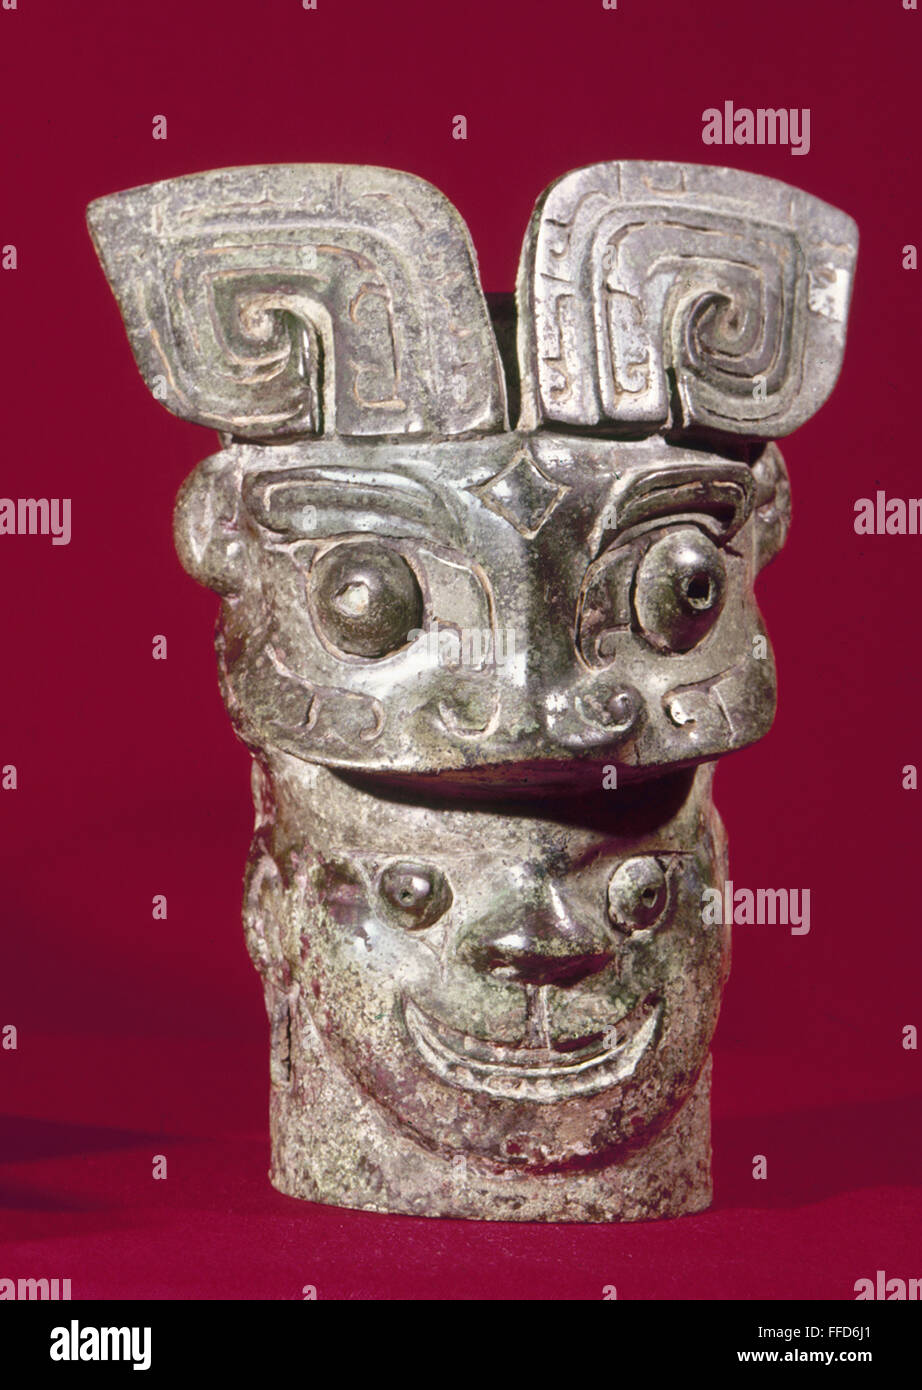 CHINA: BRONZE FINIAL. /nBronze finial in the shape of a human head under t'ao-t'ich mask, late Shang Dynasty (c1766-c1122 B.C.), China. Stock Photo